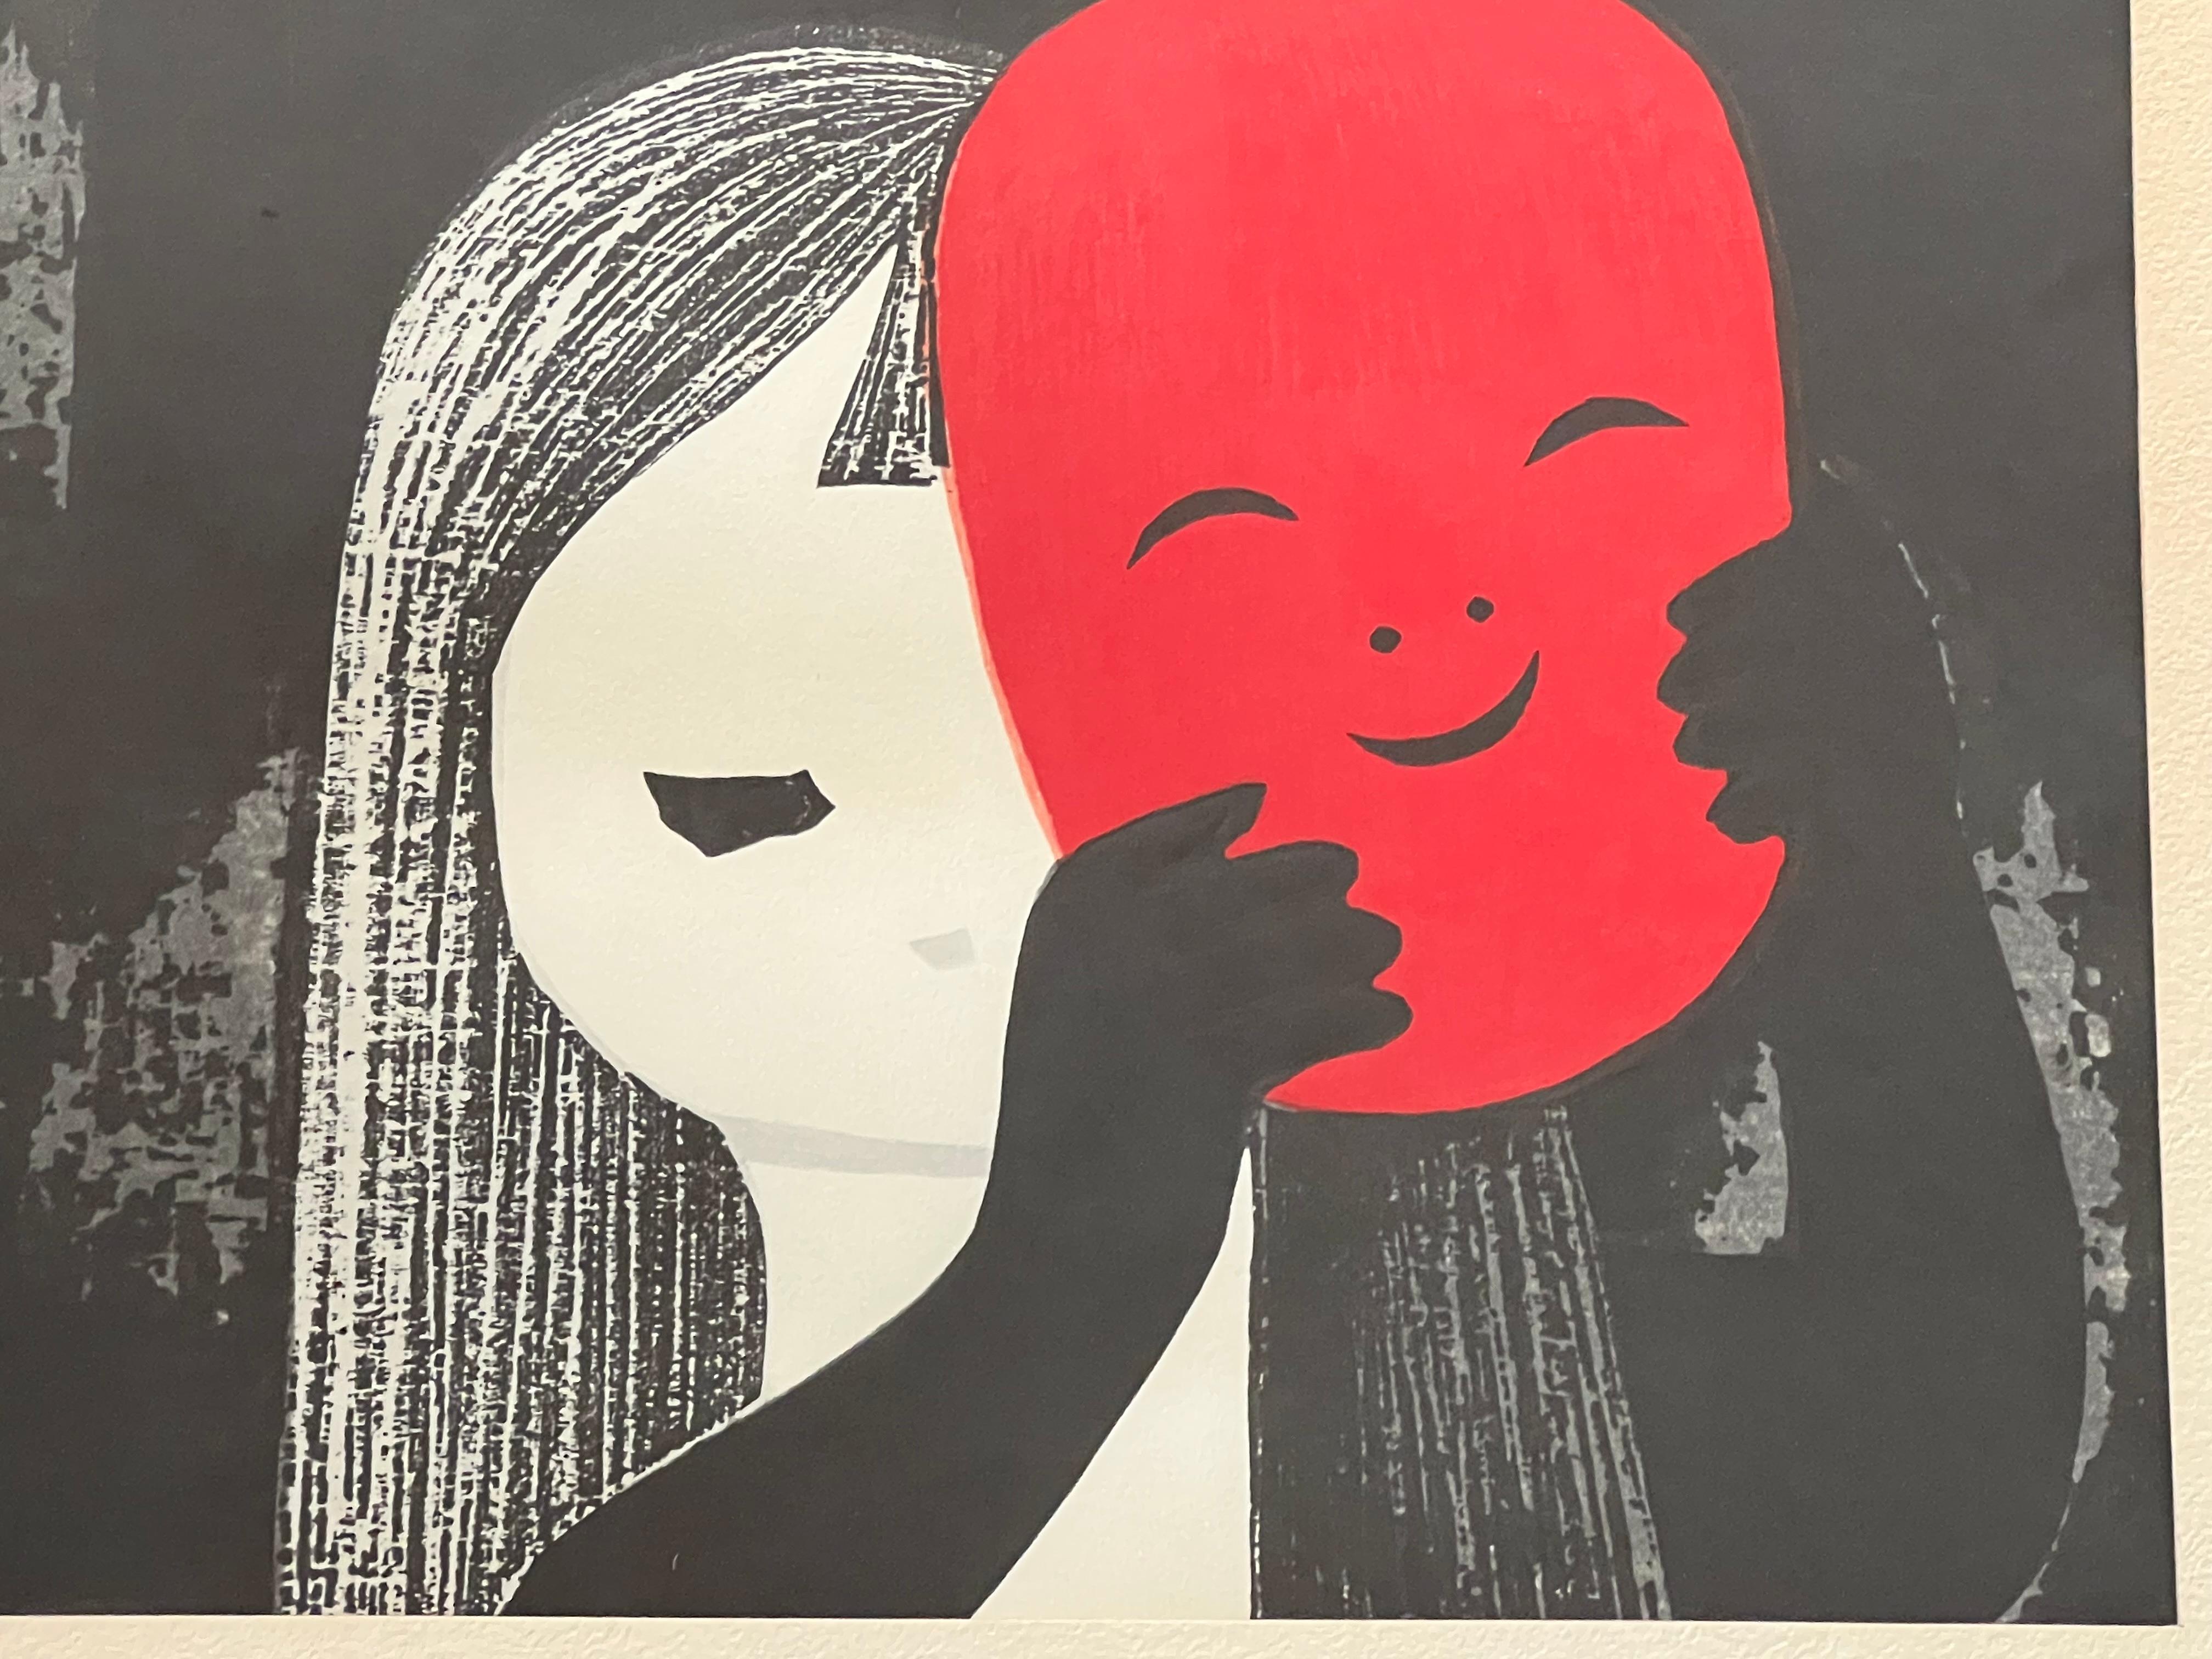 This whimsical woodblock print depicts a young girl holding a red mask up her face. 
Kaoru Kawano was a woodblock print artist who worked during the Showa period (1926-1989). Born in Hokkaido in 1916, Kawano studied at Kawabata Art School during the